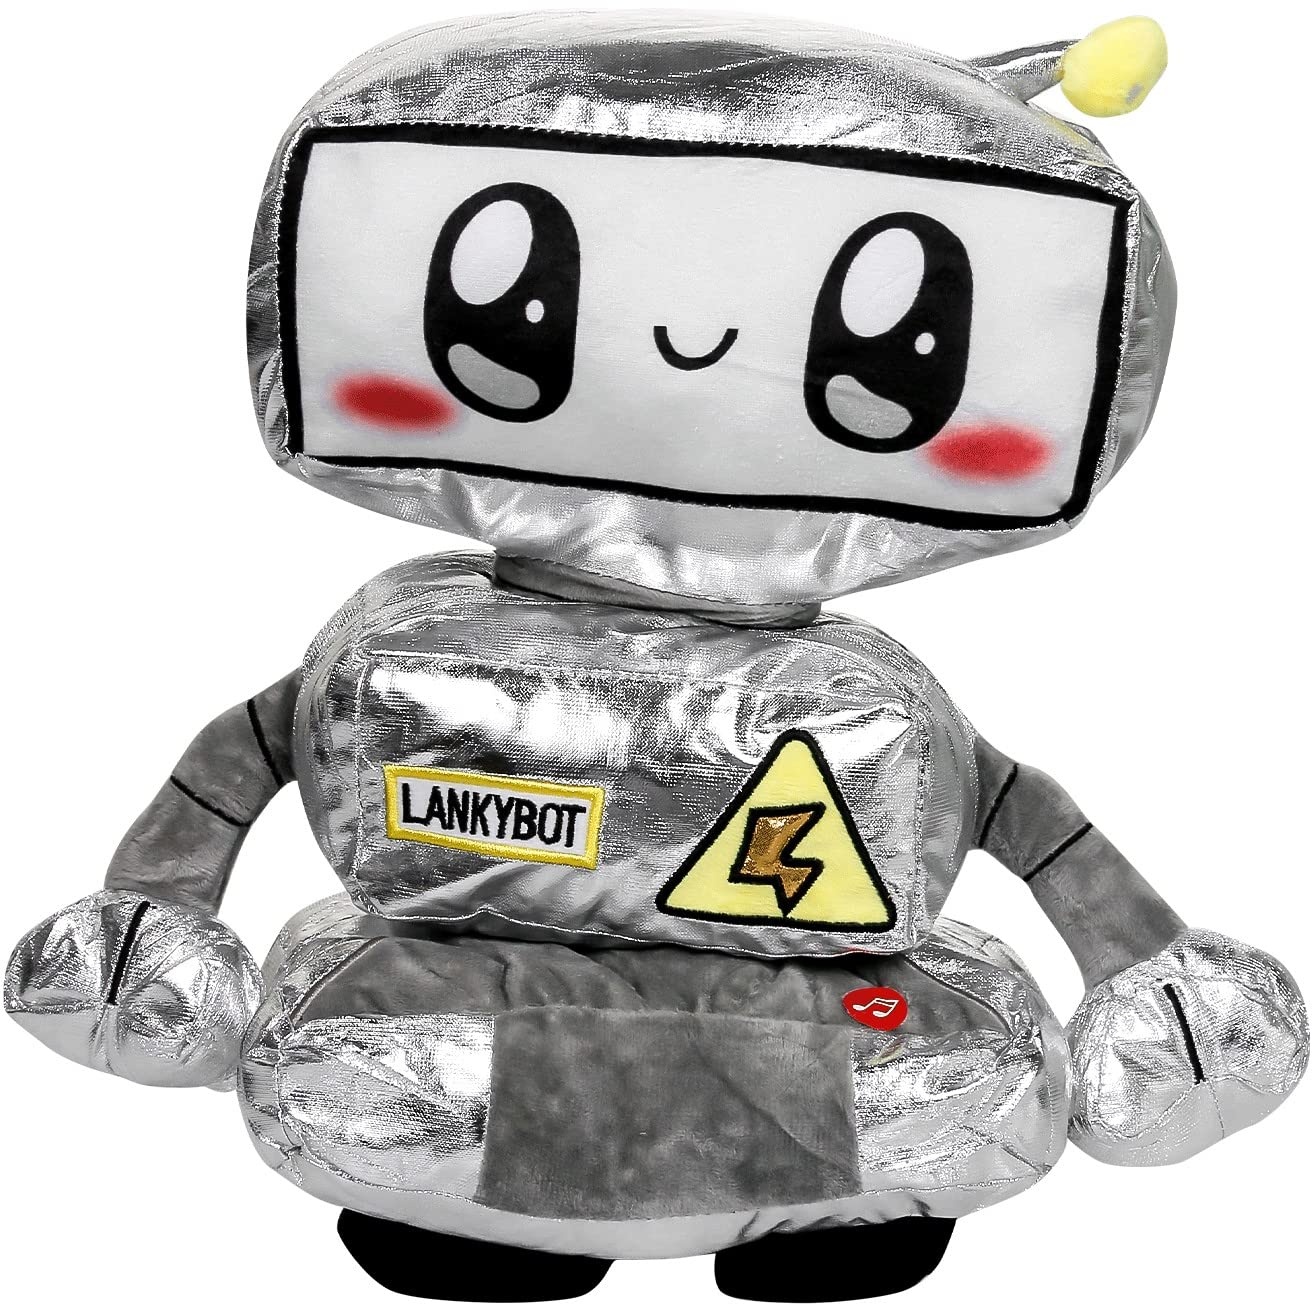 LANKYBOX Boxy Plush Toy,Lanky Toys Foxy Boxy and Rocky,Soft Stuffed Plush Toy with Removable Hood,The Best Holiday Birthday Gifts for Kids and Fans... (Robot Cyborg)